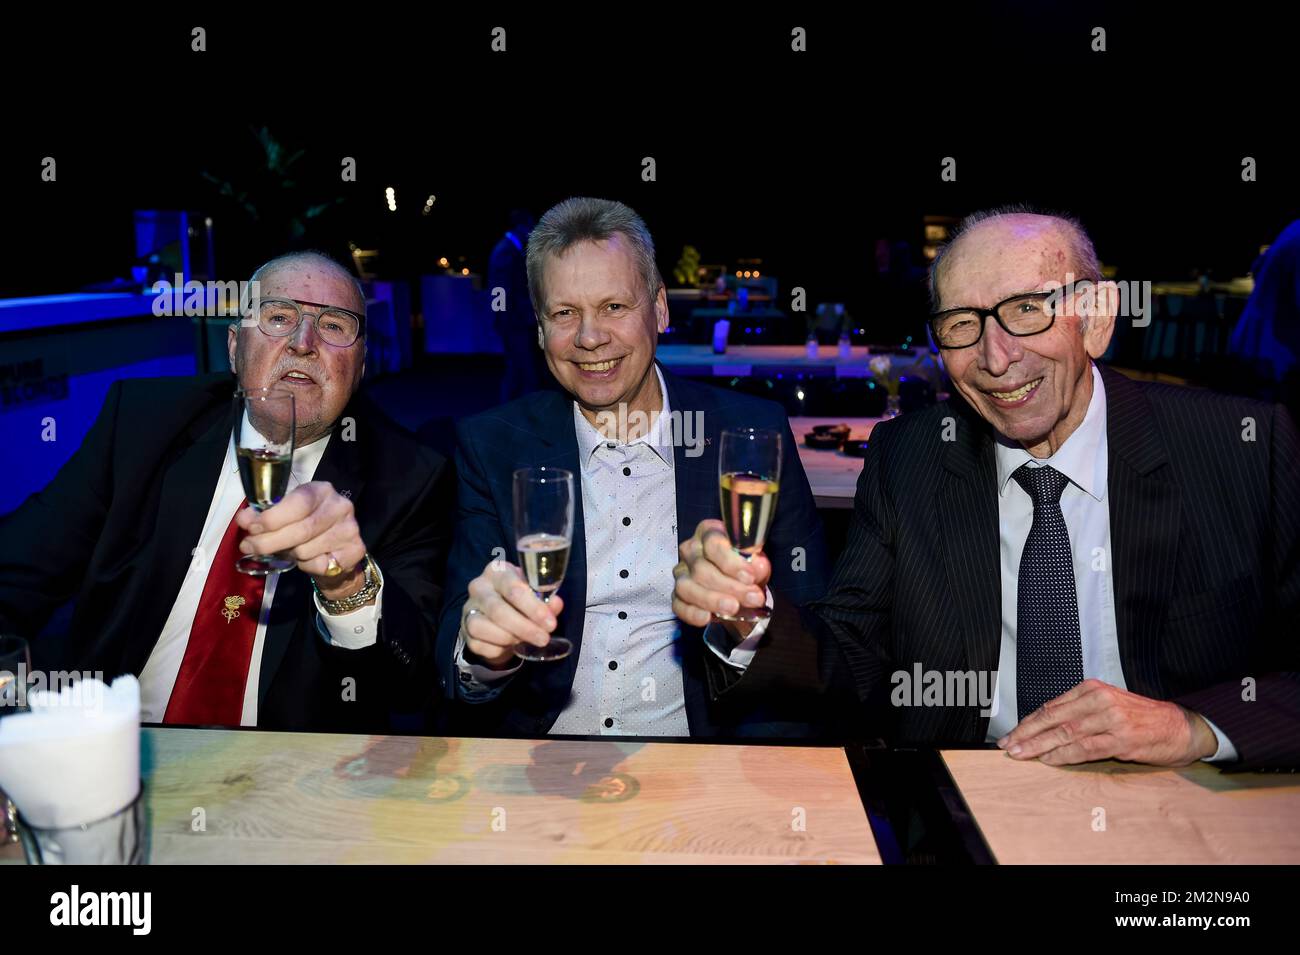 Former athlete Baron Gaston Roelants, William Van Dyck and Roger Moens are seen at the gala evening for the sport women and men of the year 2018 awards, Saturday 22 December 2018, in Brussels. BELGA PHOTO LAURIE DIEFFEMBACQ-JASPER JACOBS-GREGORY VAN GANSEN-PHILIPPE CROCHET  Stock Photo